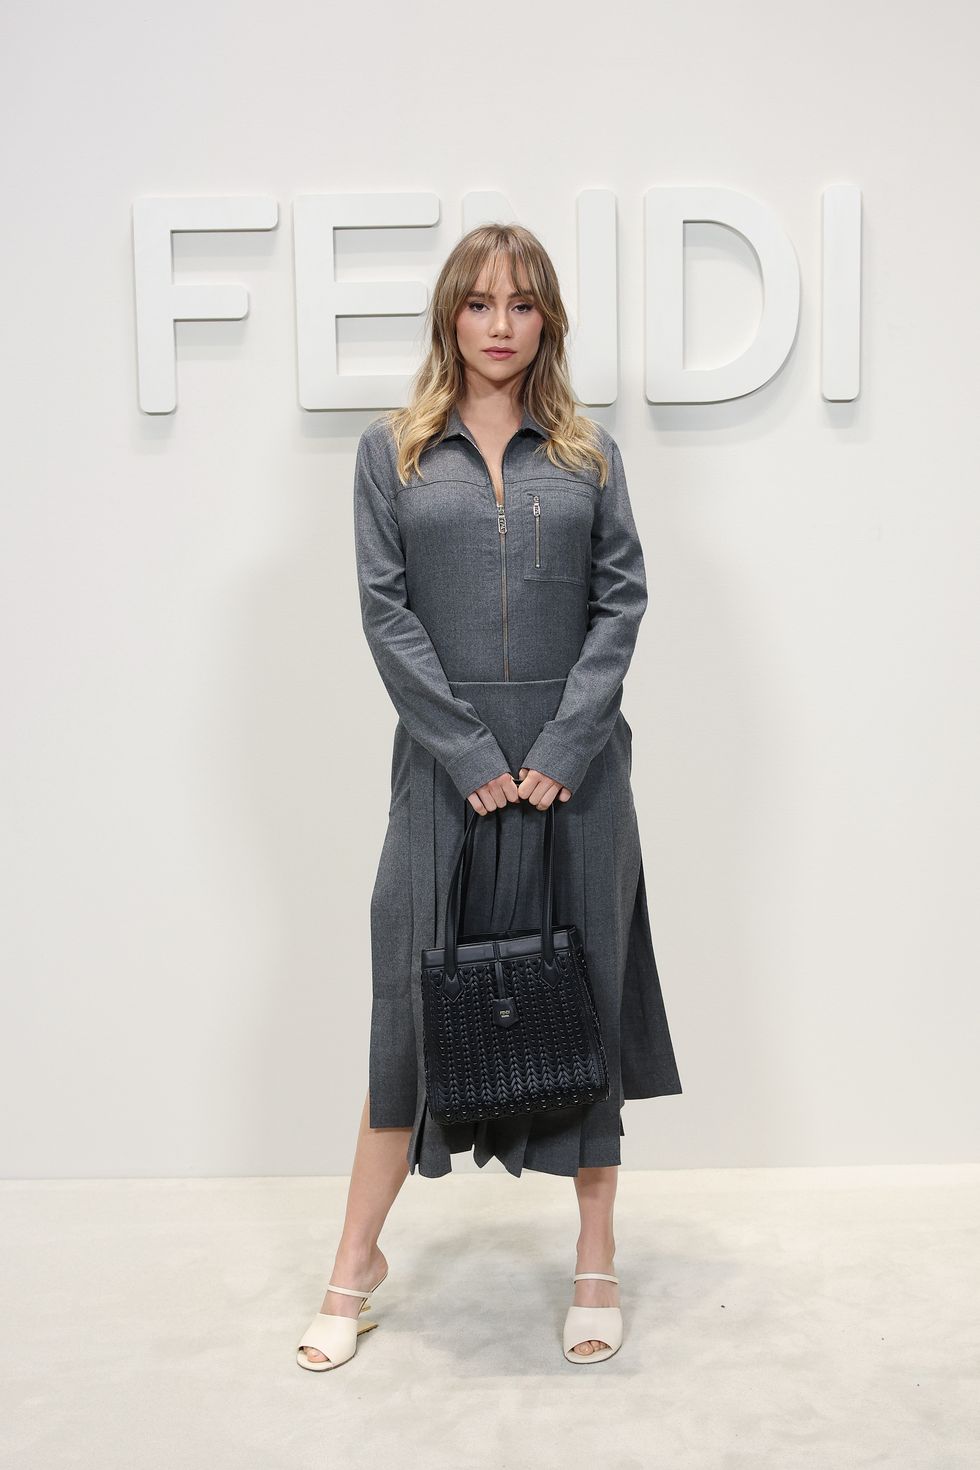 milan, italy september 20 suki waterhouse attends the fendi spring summer 2024 fashion show on september 20, 2023 in milan, italy photo by daniele venturelligetty images for fendi